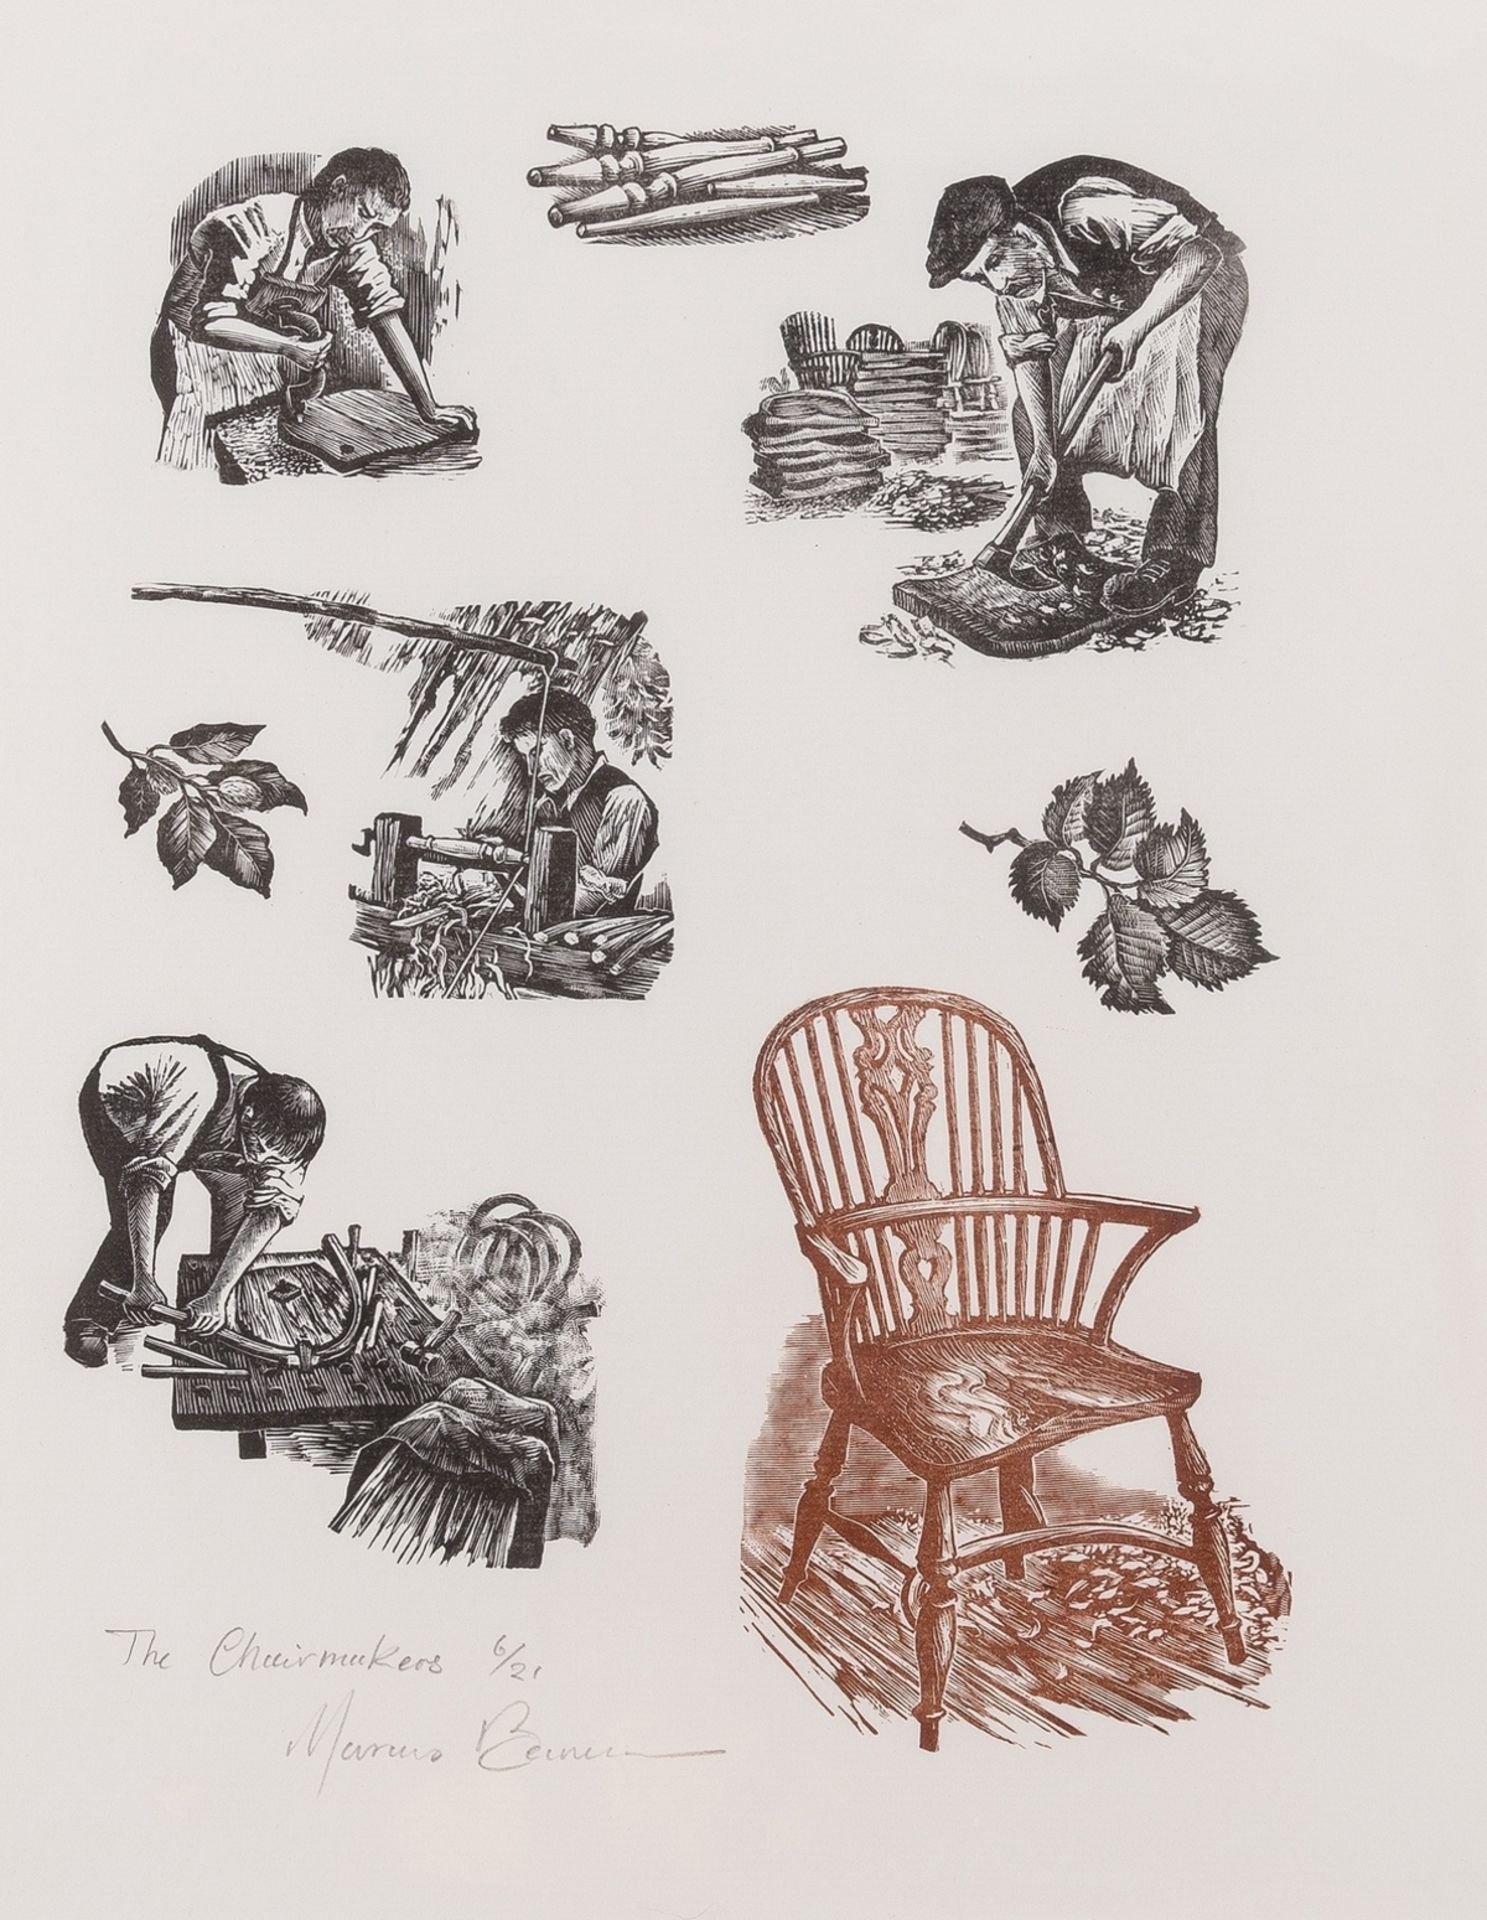 Beaven (Marcus) The Chairmakers, wood-engraving, [c.1996]; and 13 others by the same hand (14).